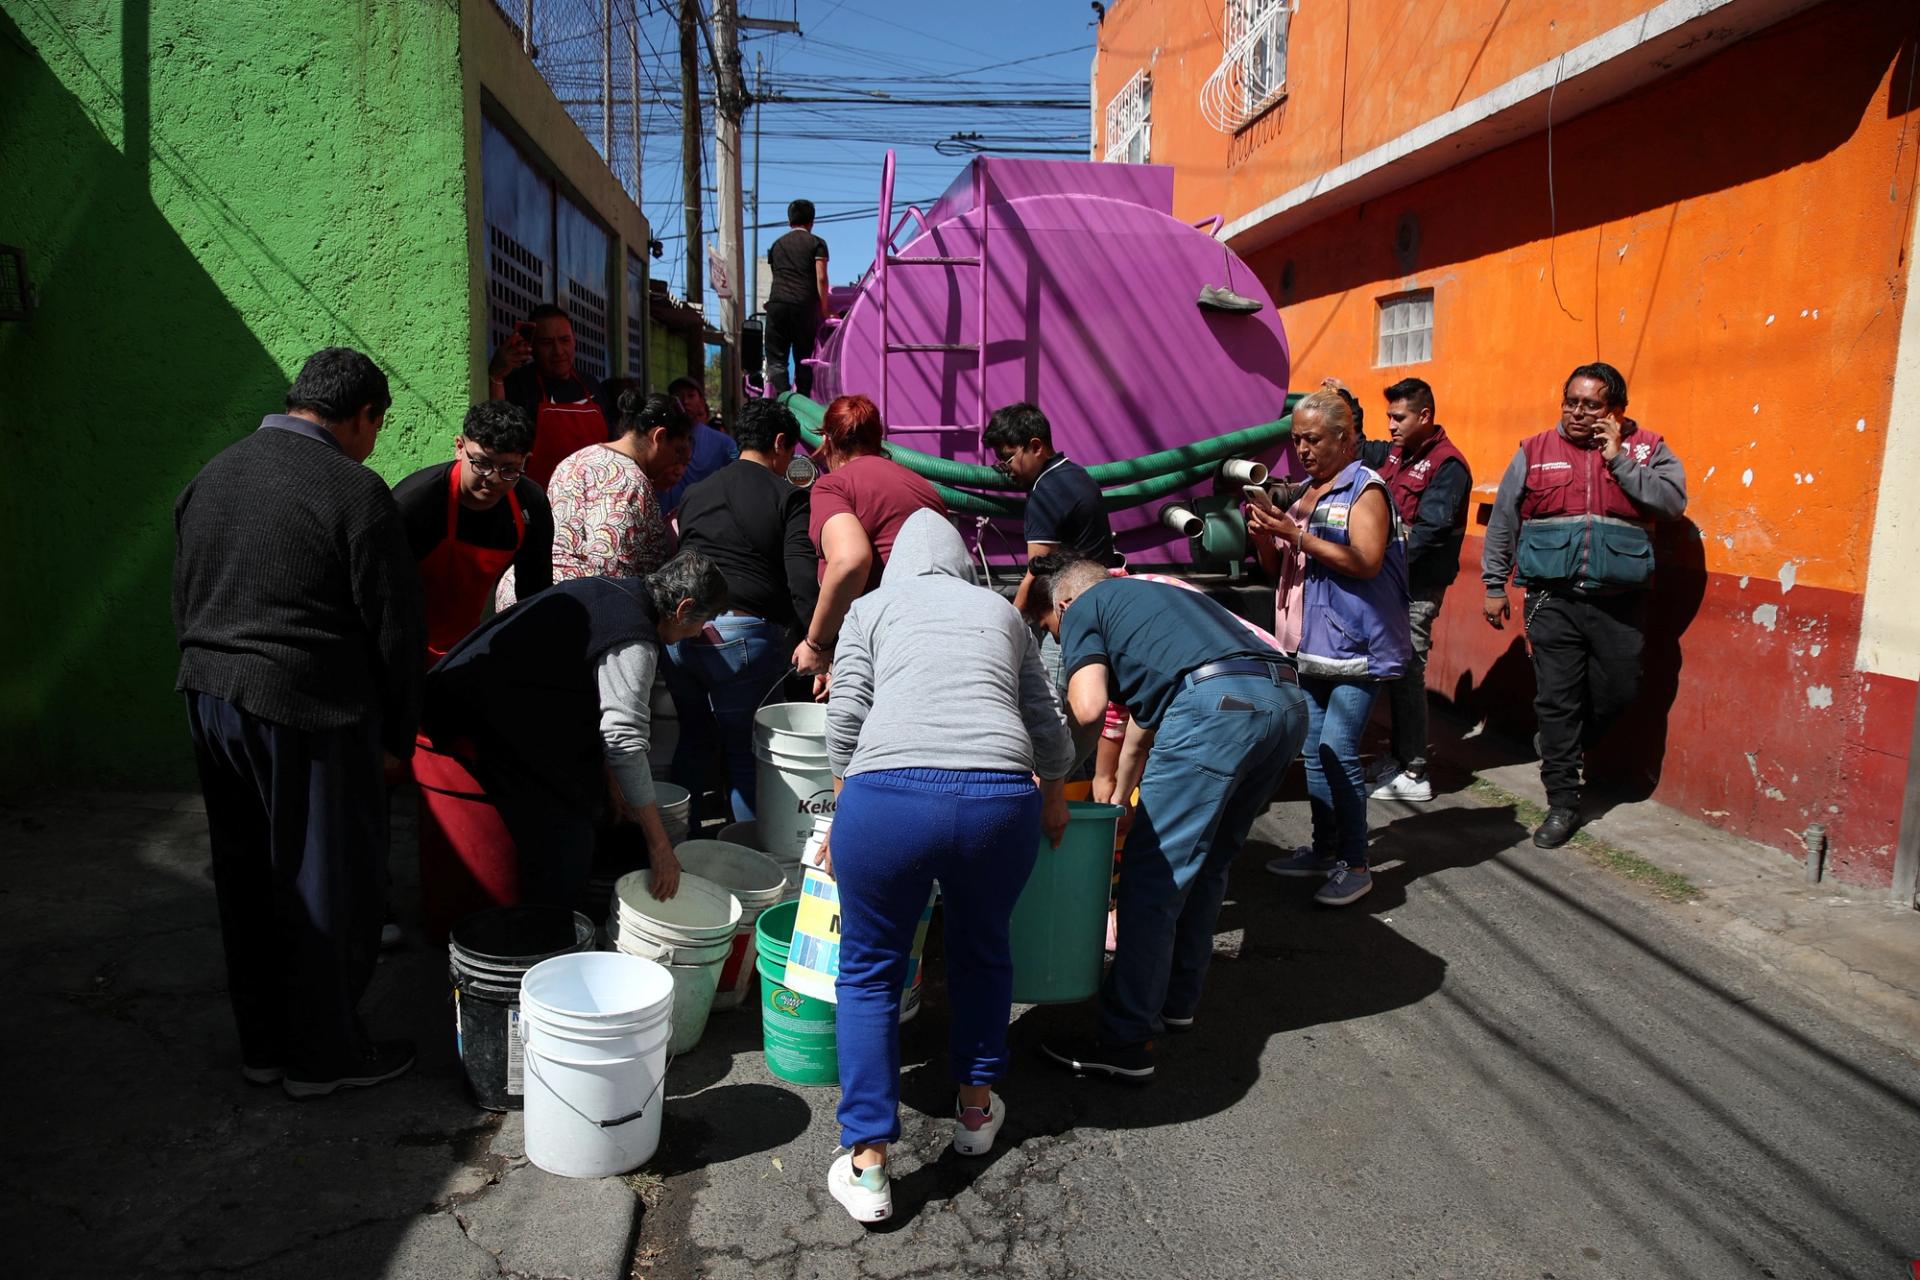 Residents wait their turn to receive water from a truck in the Azcapotzalco neighborhood, as tensions over water scarcity in Mexico City, one of Latin America's largest capitals, are boiling over as residents in some neighborhoods protest weeks-long dry spells in their homes, in Mexico City, Mexico January 26, 2024. REUTERS/Henry Romero